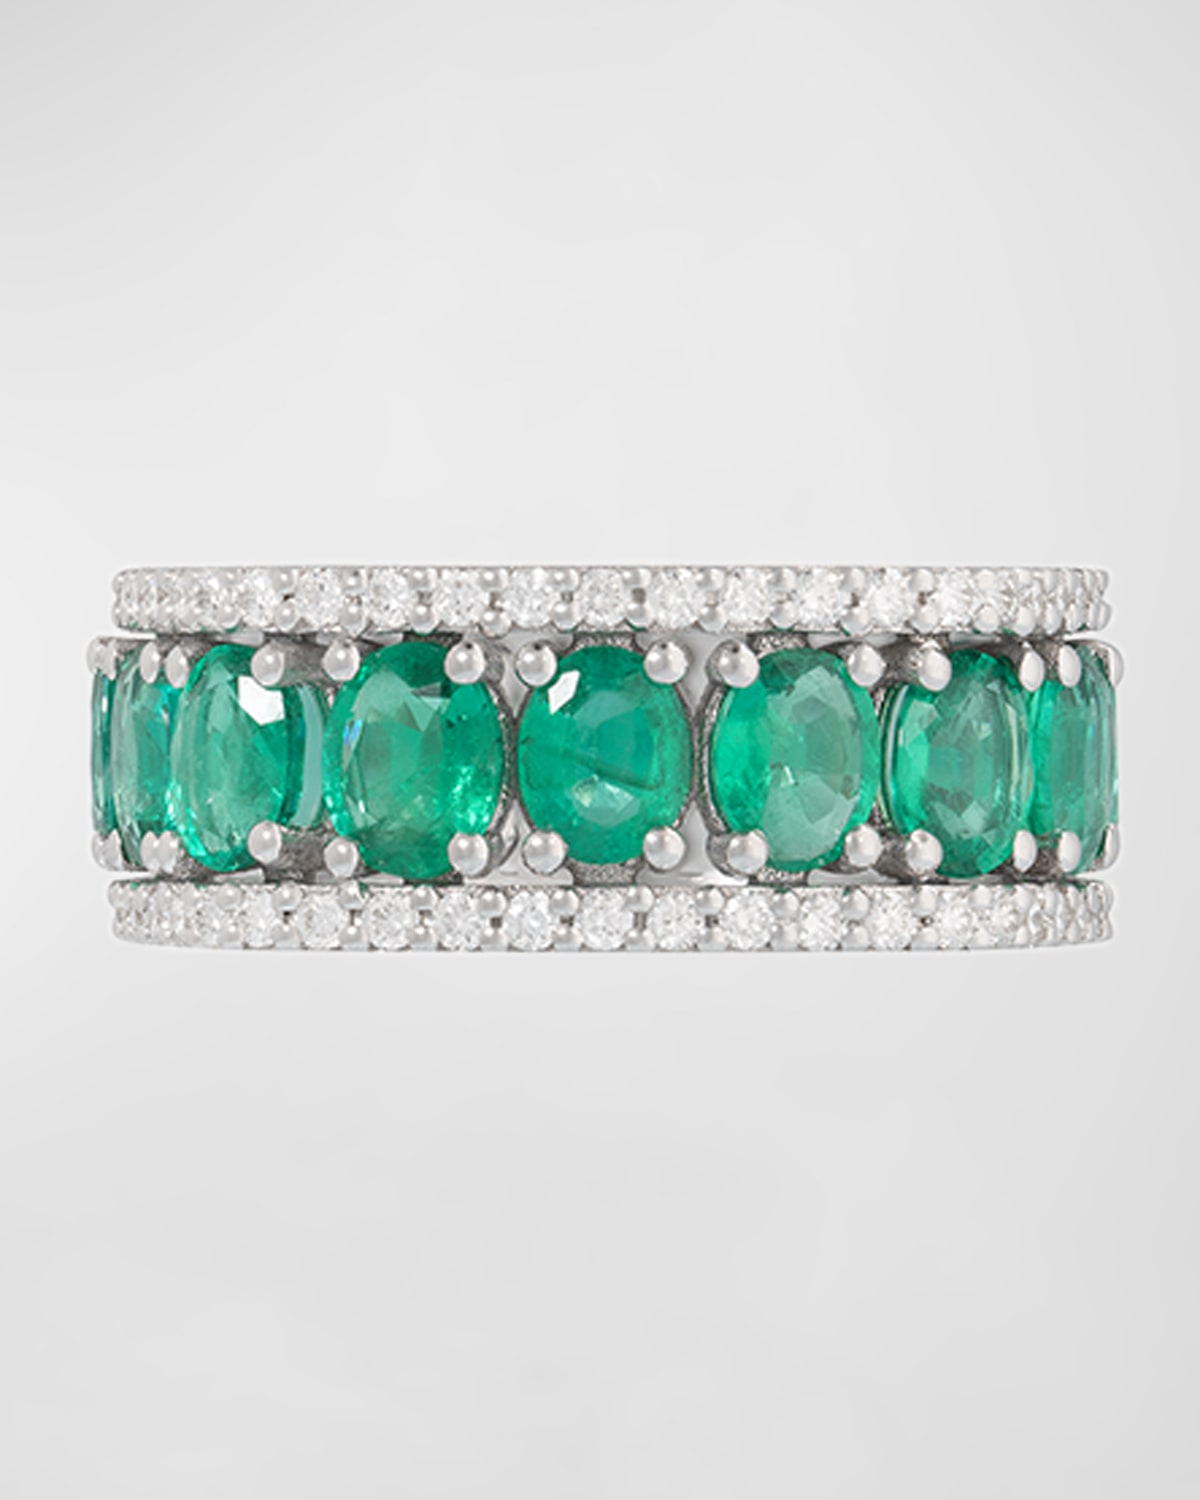 Procida 18K White Gold Ring with White Diamonds and Emeralds